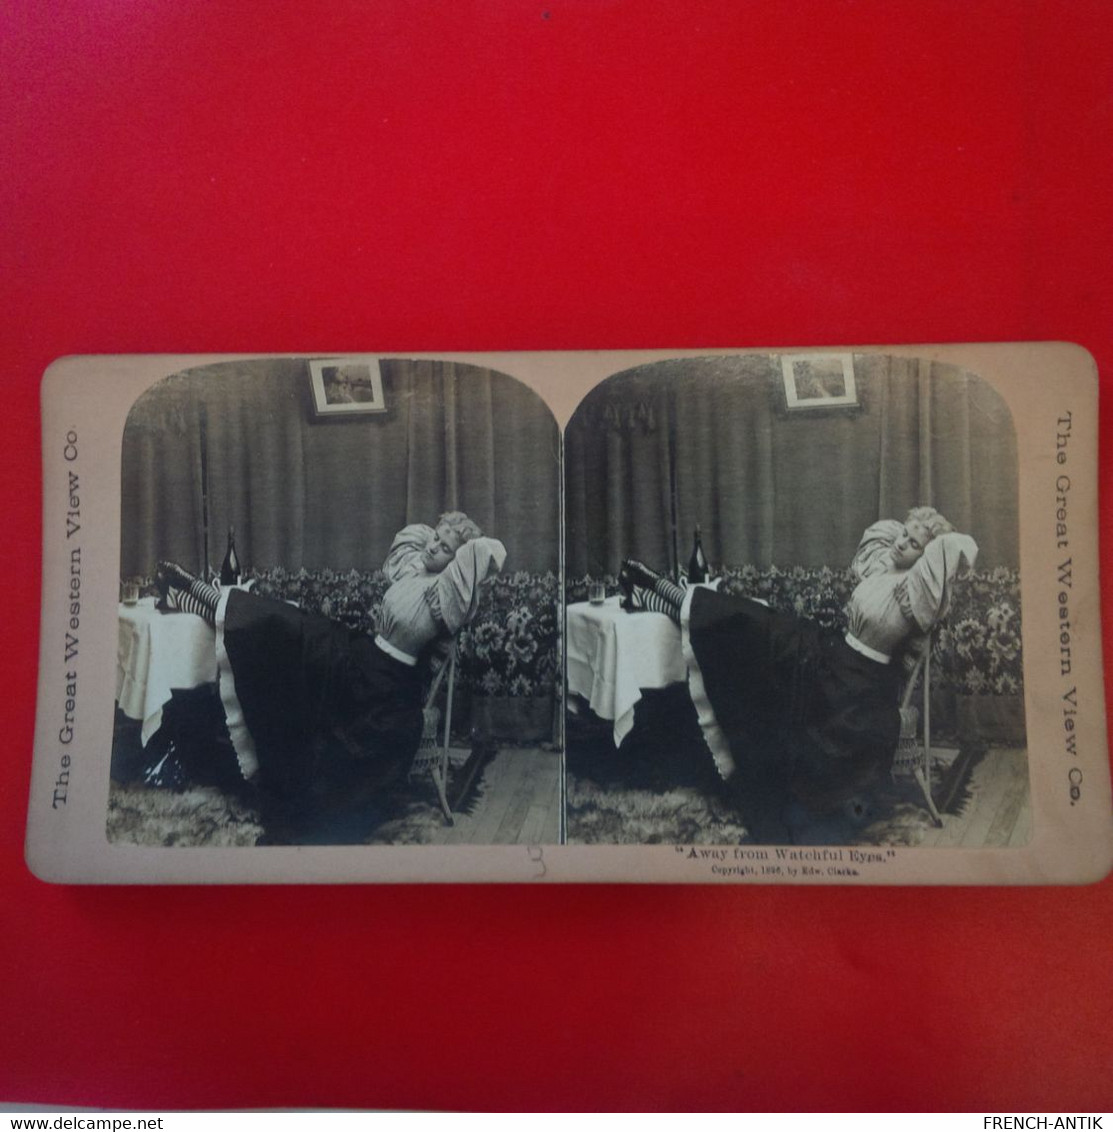 PHOTO STEREO AWAY FROM WATCHFUL EYES - Stereoscopic